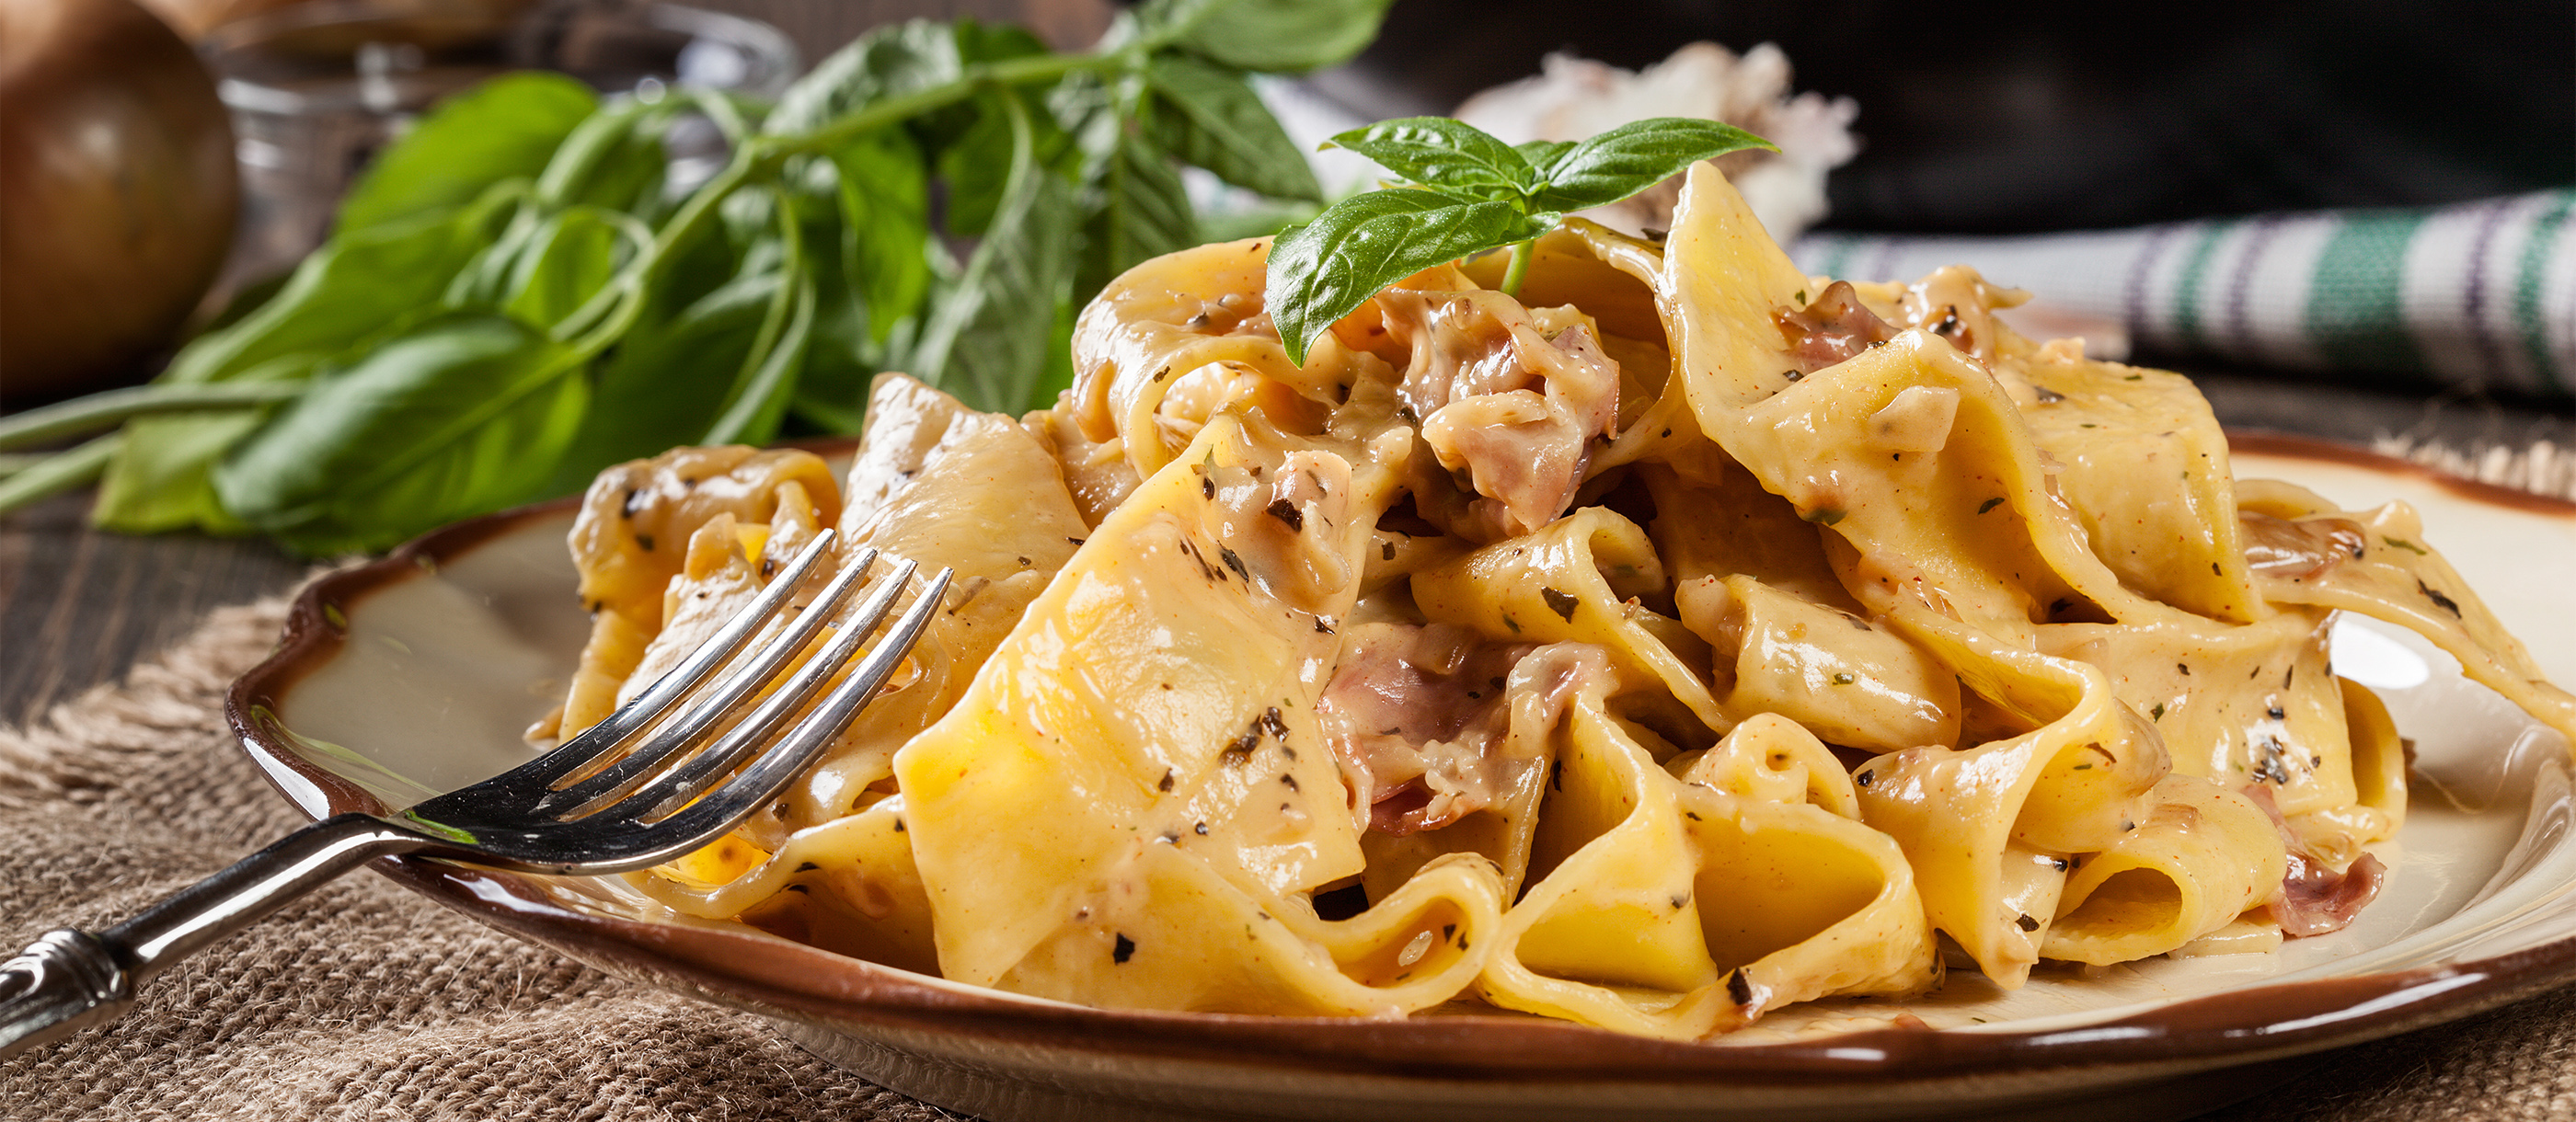 Pappardelle Alla Lepre Pasta From Tuscany, Italy